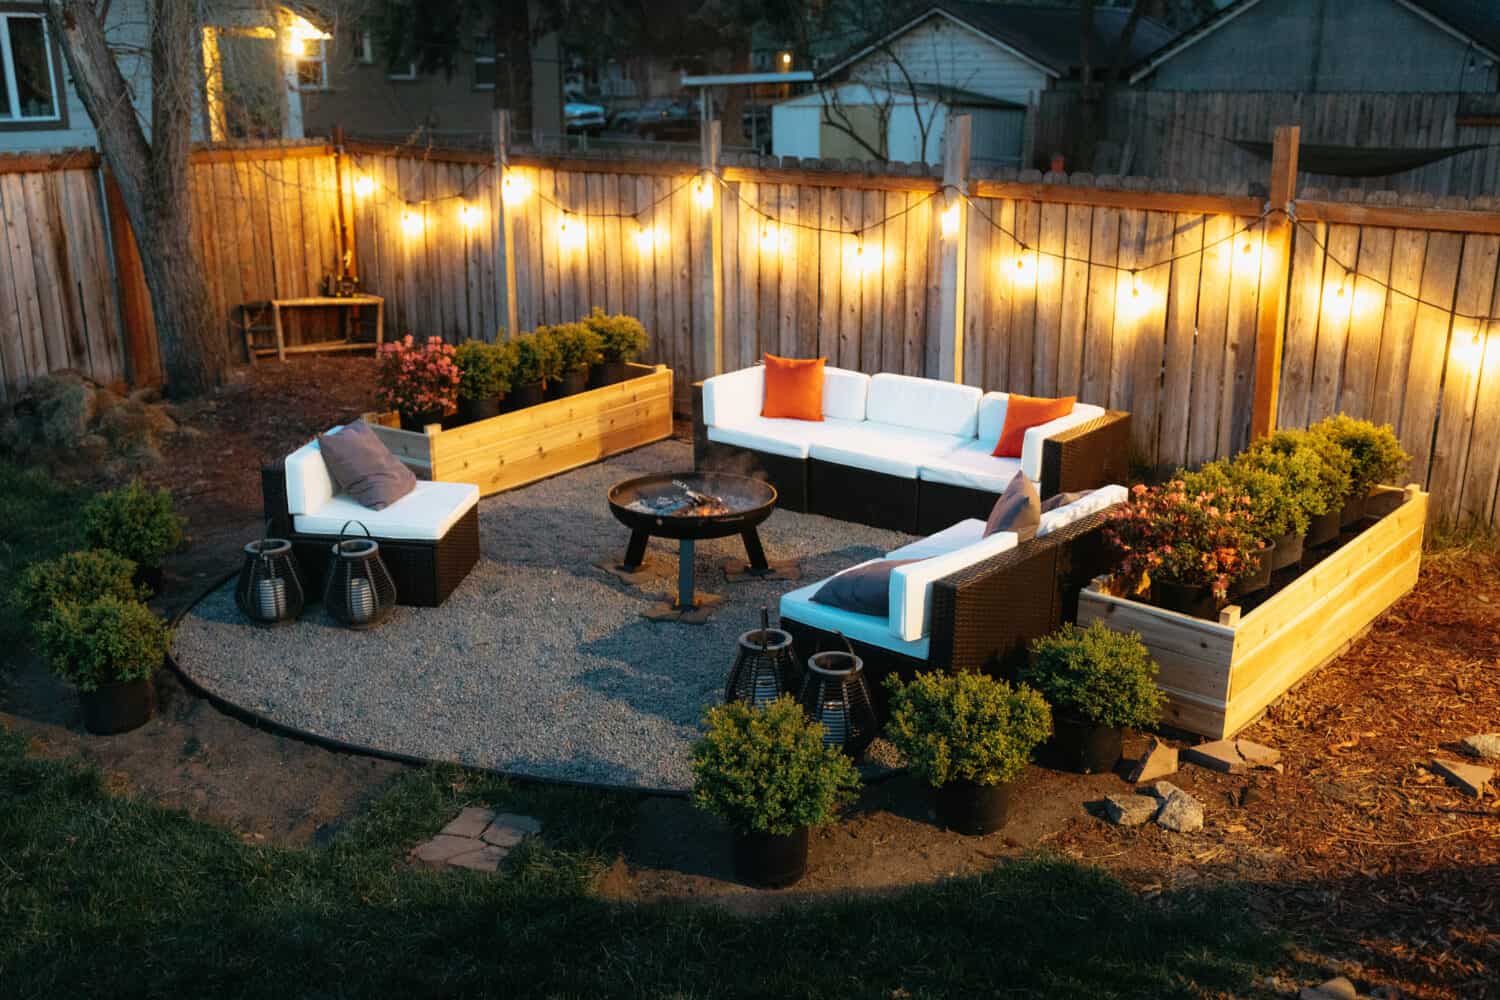 Low Budget Backyard Fire Pit, How To Build An Outside Fire Pit